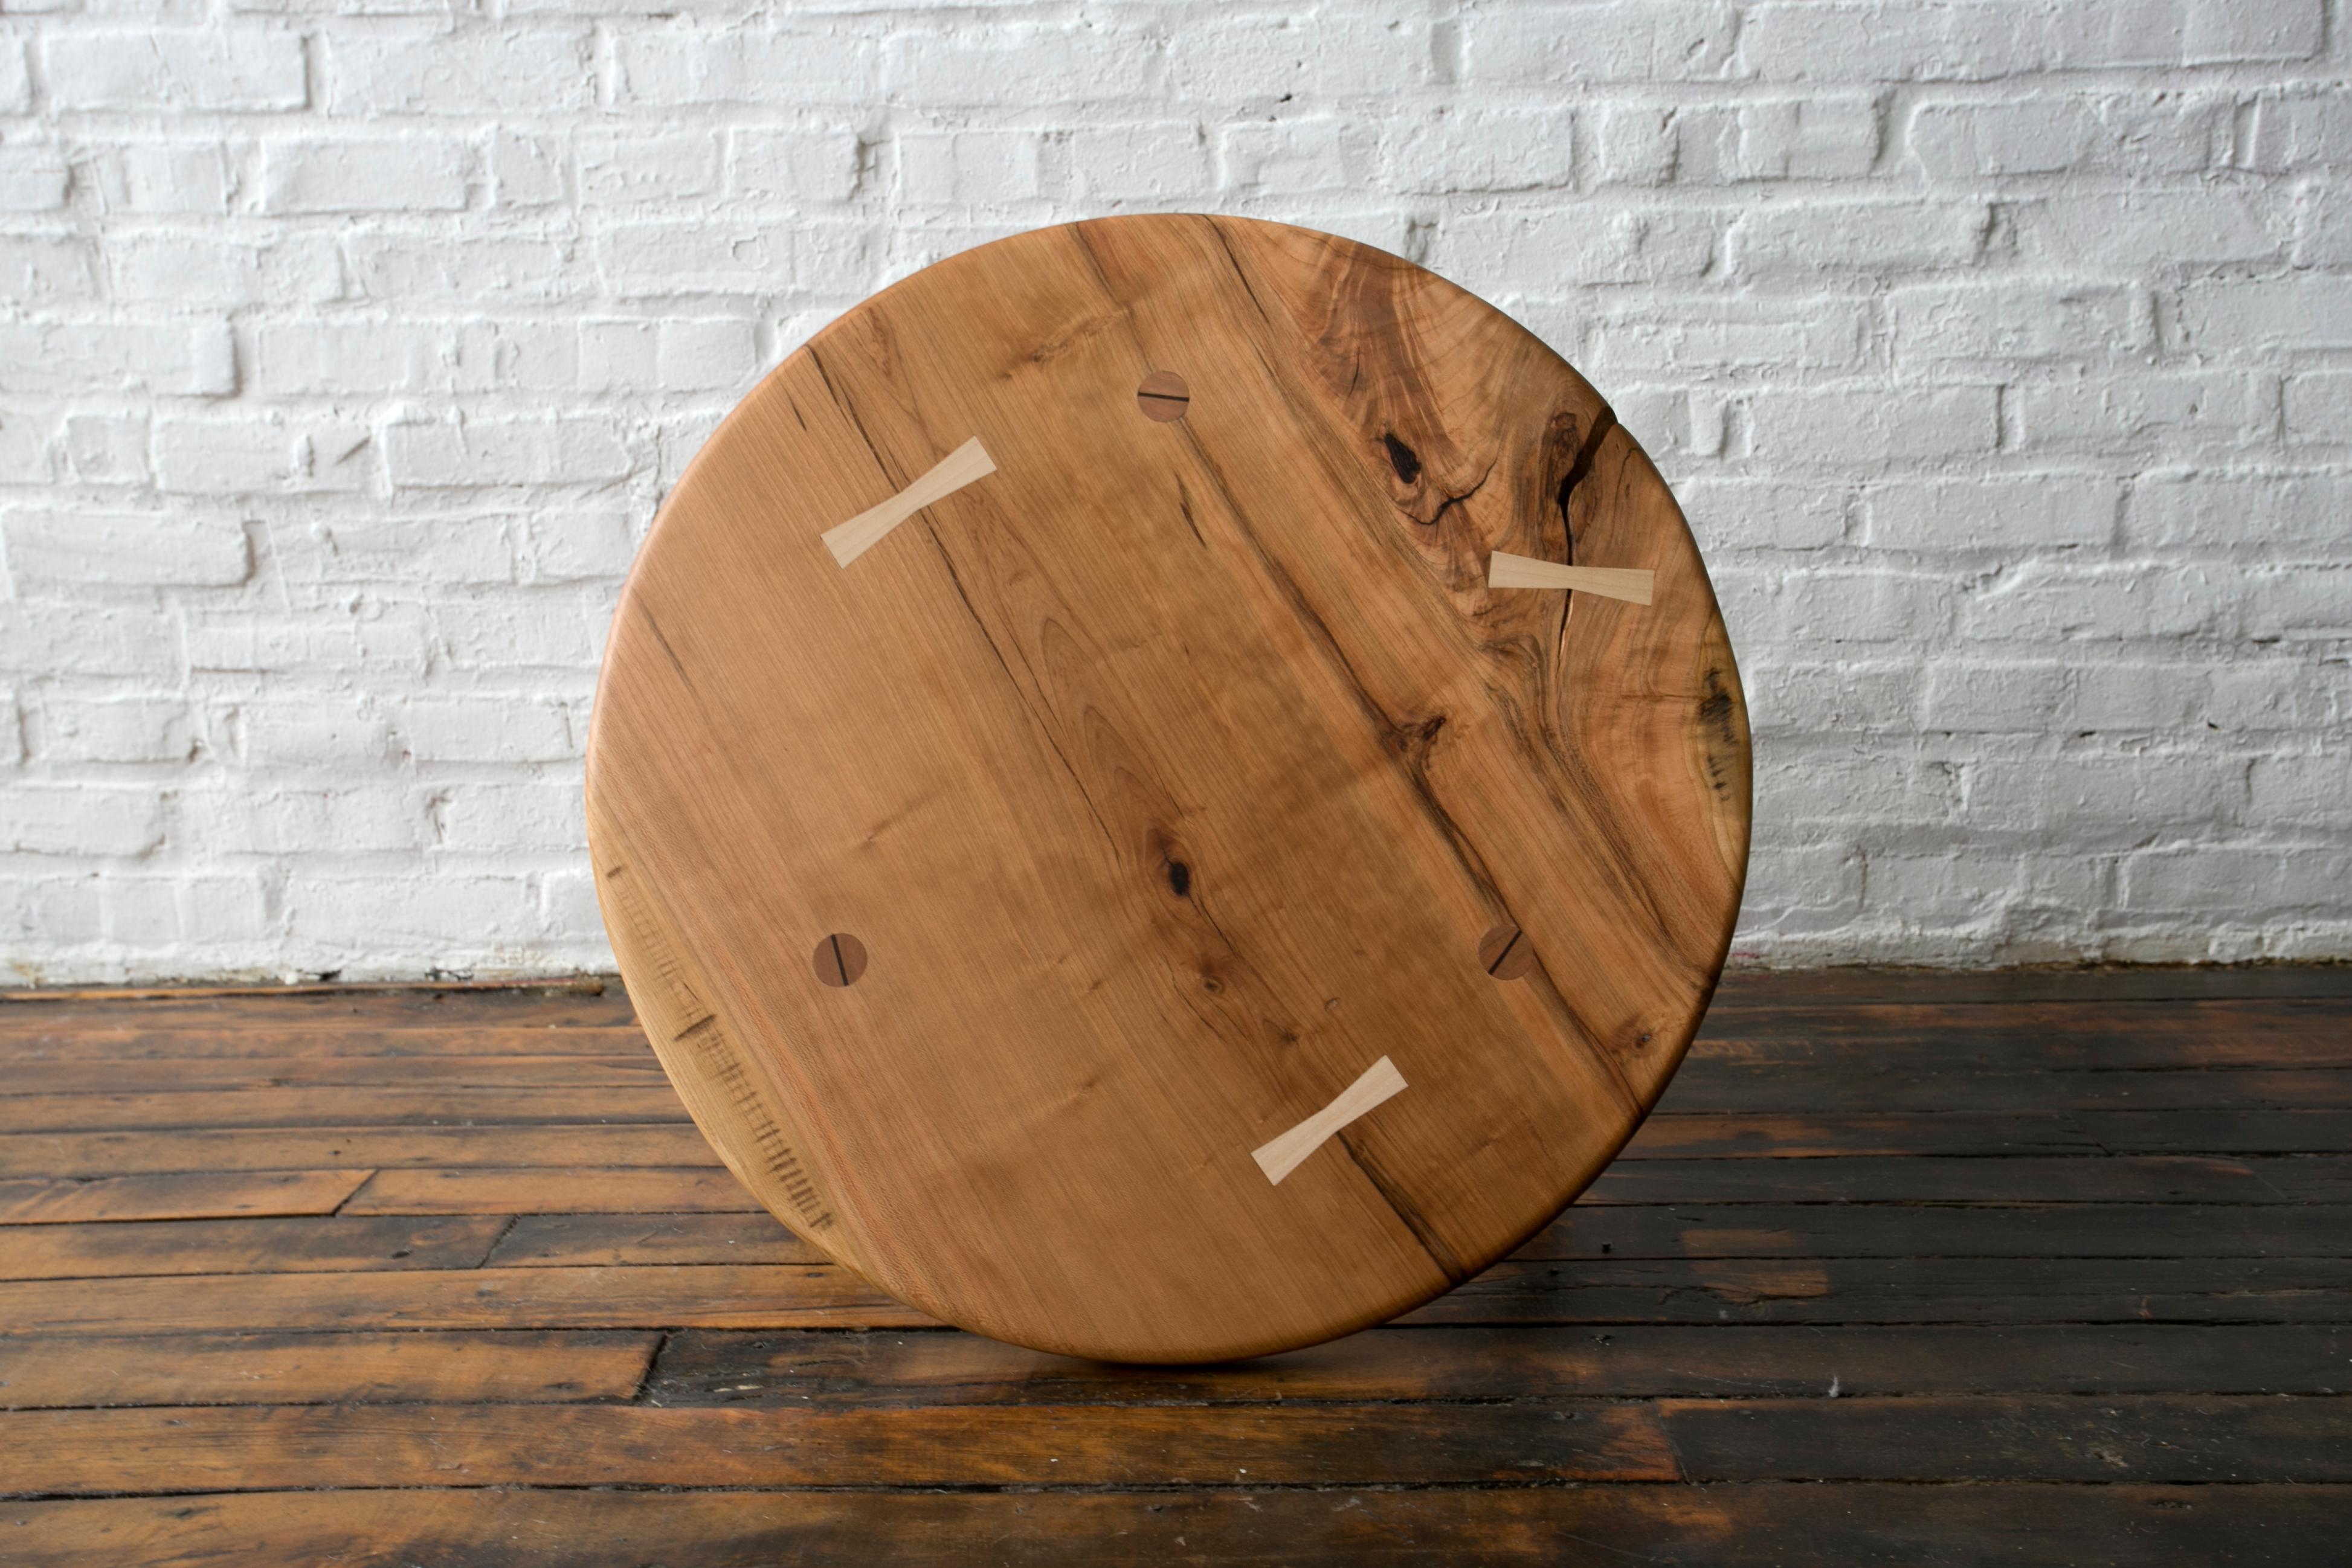 We’ve created several versions of our coffee table over the years, eventually landing on this design. The simple circular top draws out the depth in the grain, and celebrates the structure of the tree it was made from. The base is a self reinforcing